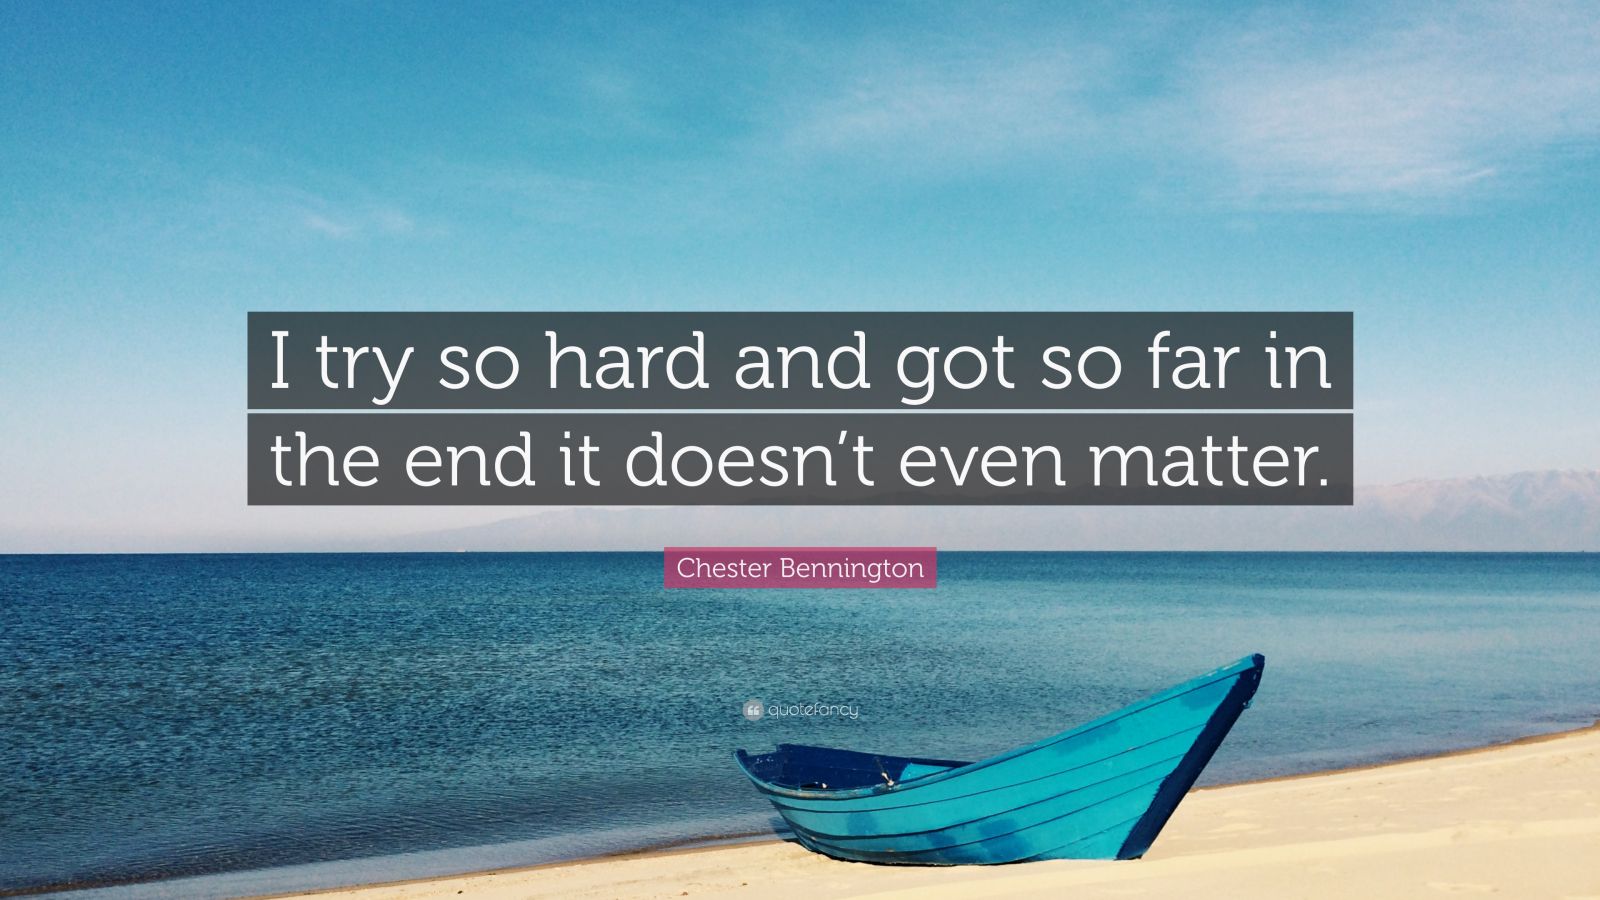 Chester Bennington Quote “i Try So Hard And Got So Far In The End It